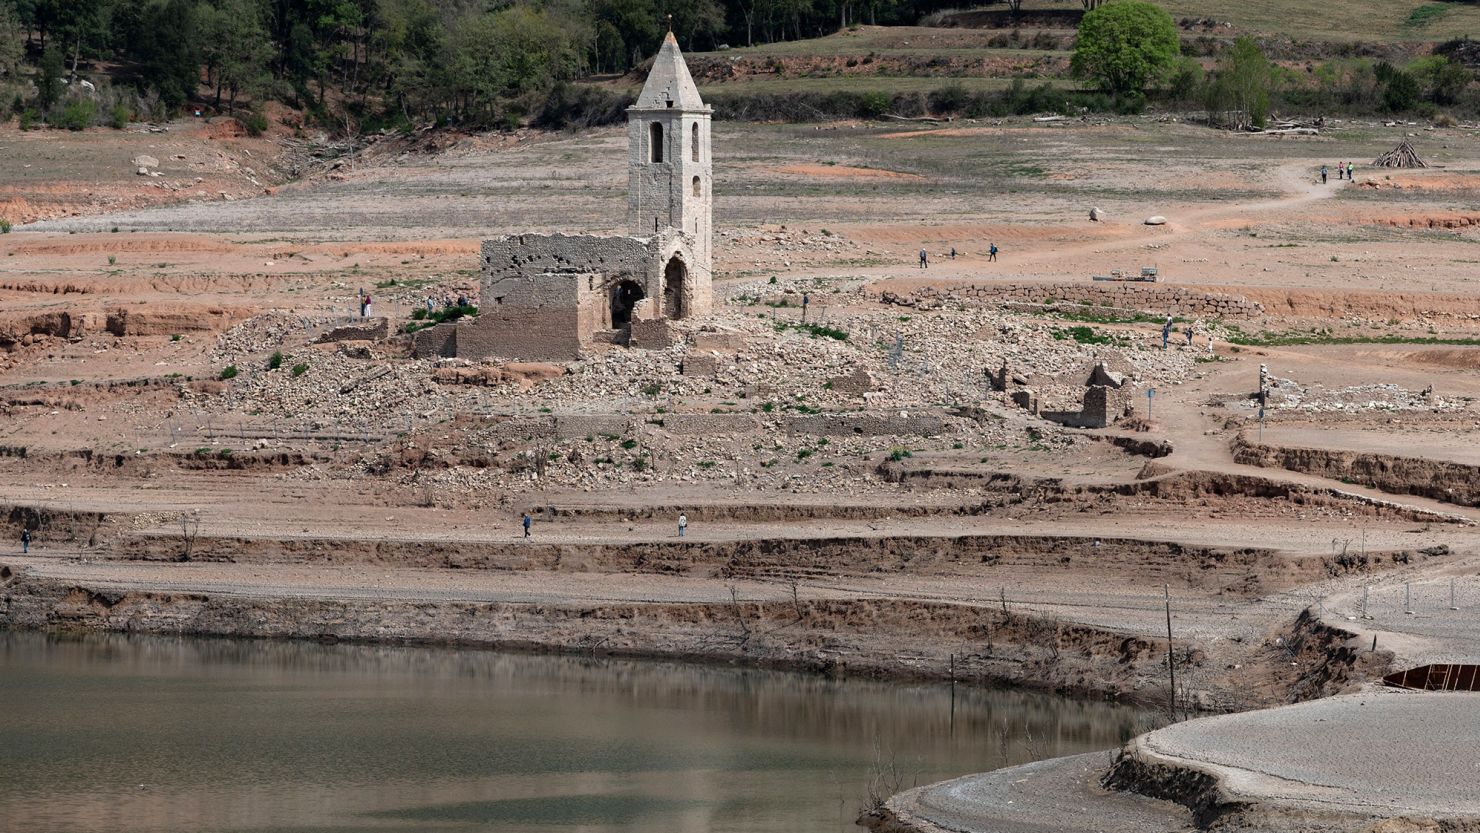 The Sau Reservoir in Catalonia, Spain. One of the country's worst droughts in 50 years has left reservoirs at very low levels.